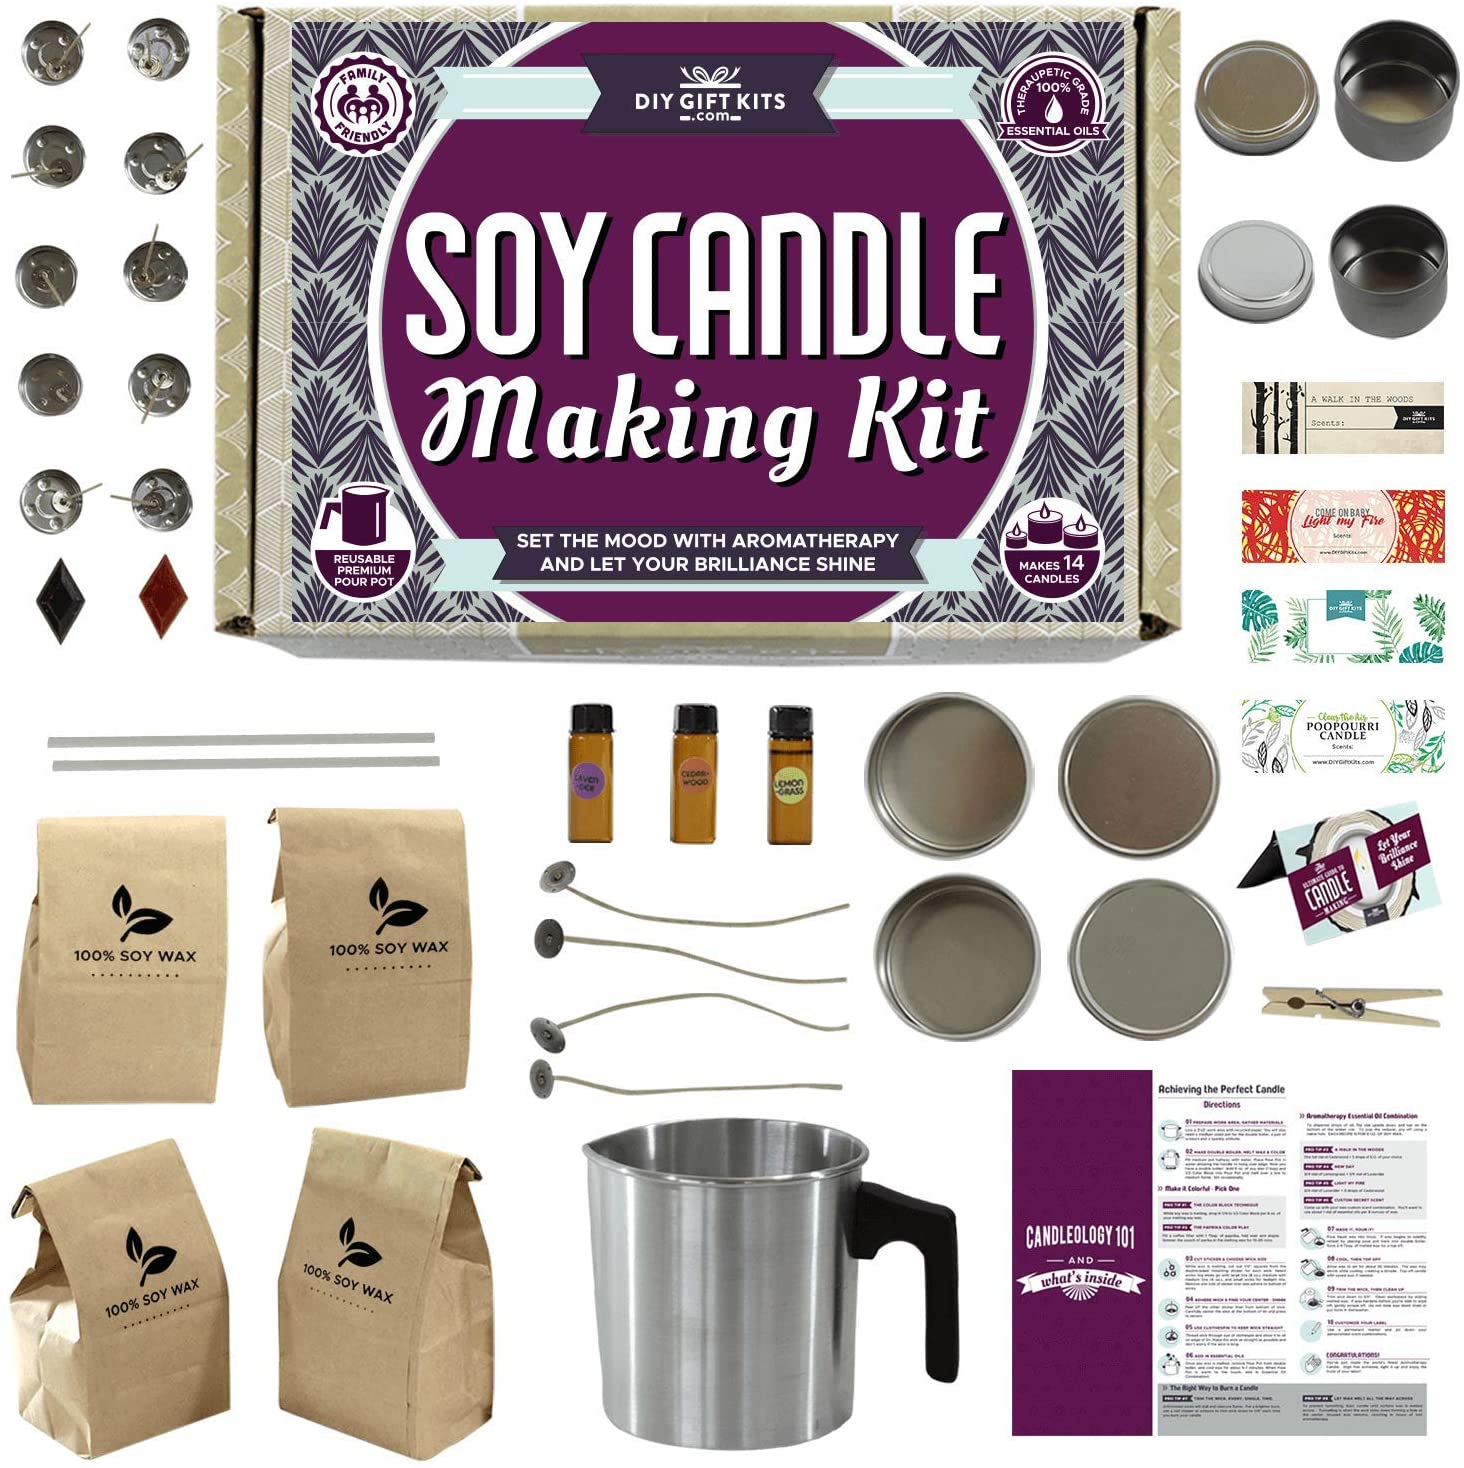 Hearth & Harbor Natural Soy Wax and DIY Candle Making Supplies - Supply Kit  - Natural Soy Wax - Cotton Wicks, Centering Tools, Candle Wax Flakes and  More - 5 Pounds